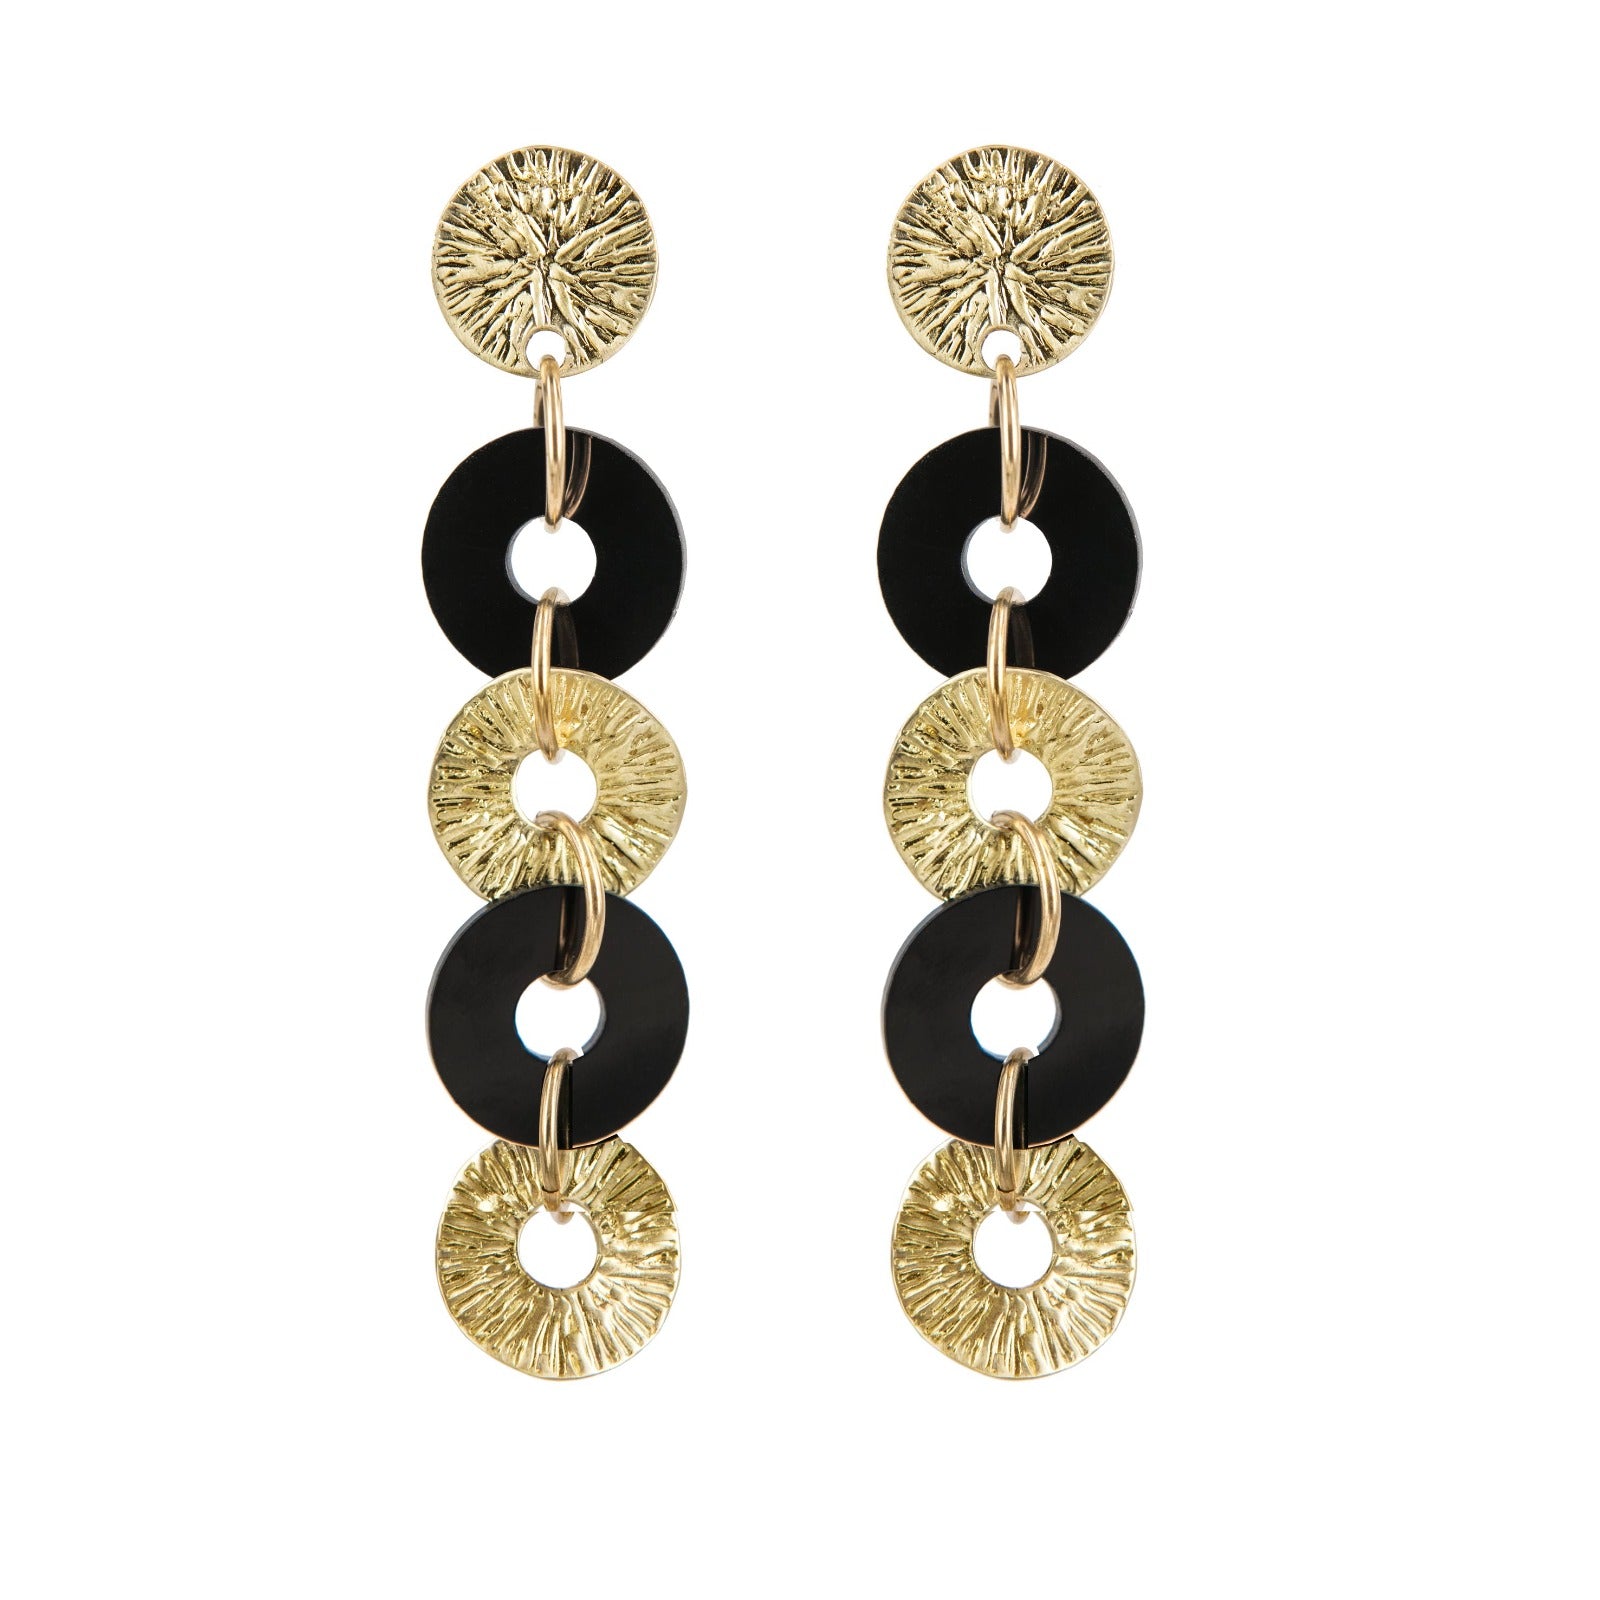 EARRINGS POLO GOLD AND BLACK – Chiara Bcn Jewelry